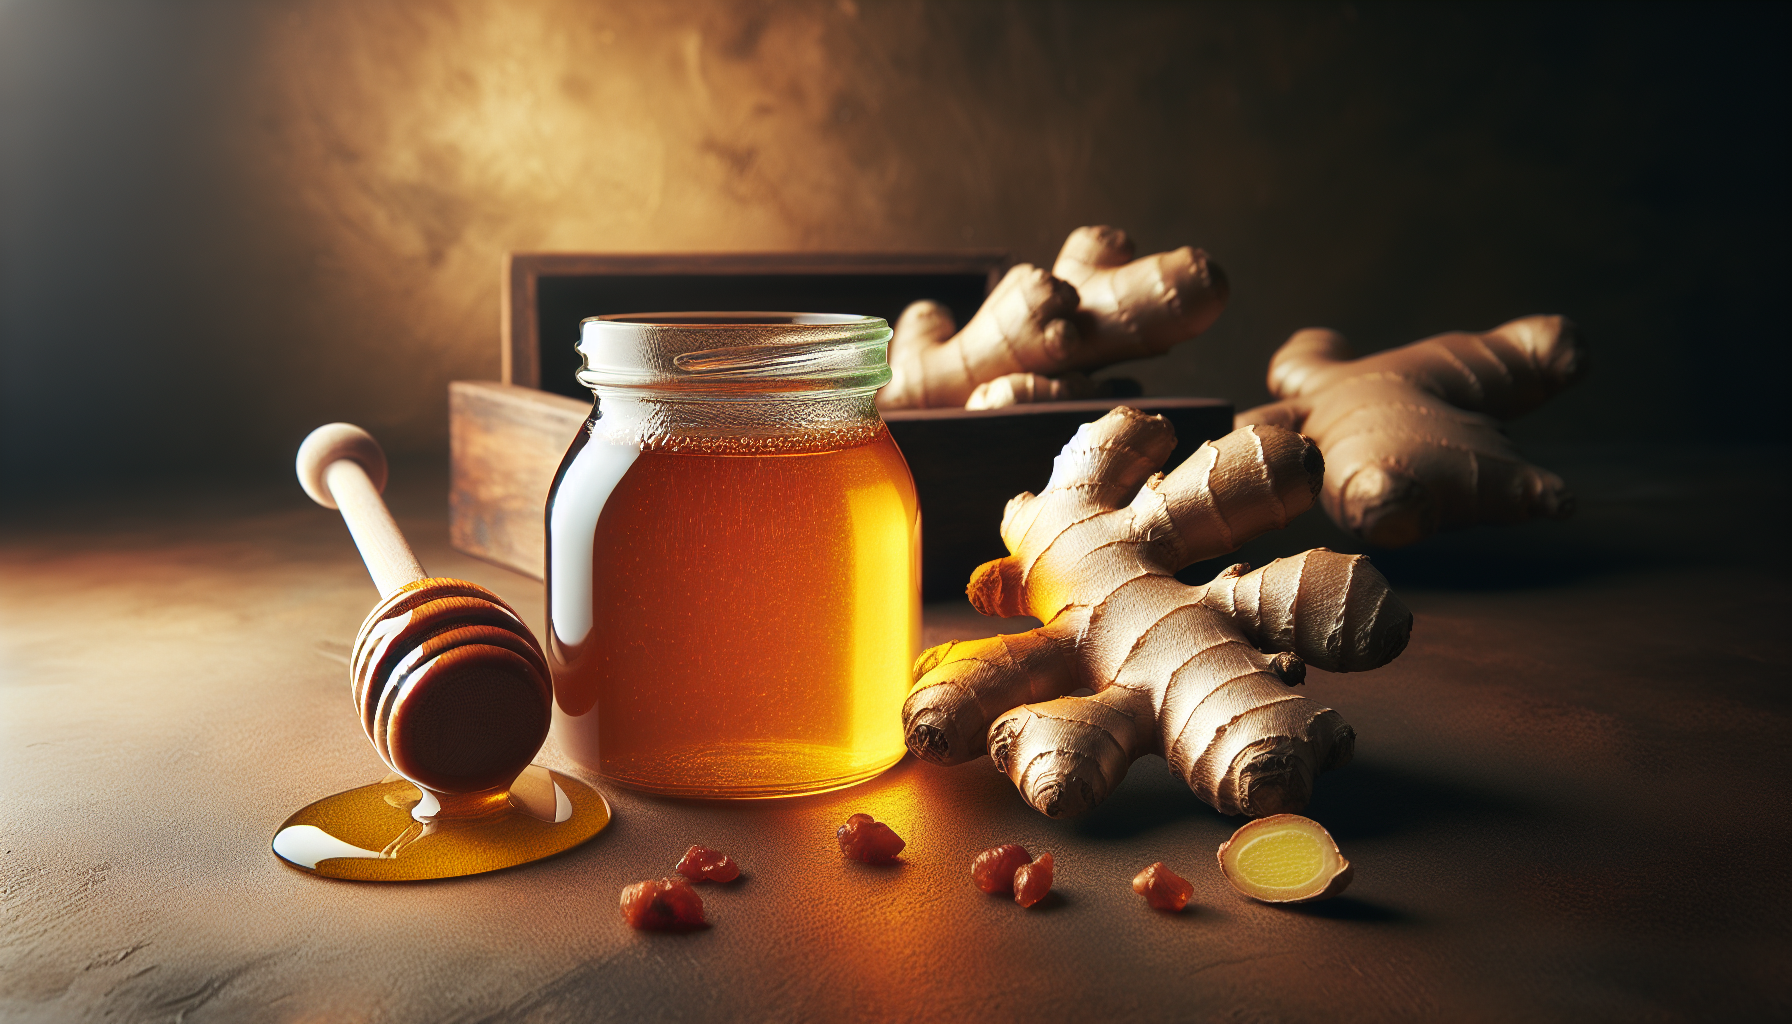 What Are The Benefits Of Ginger And Honey?